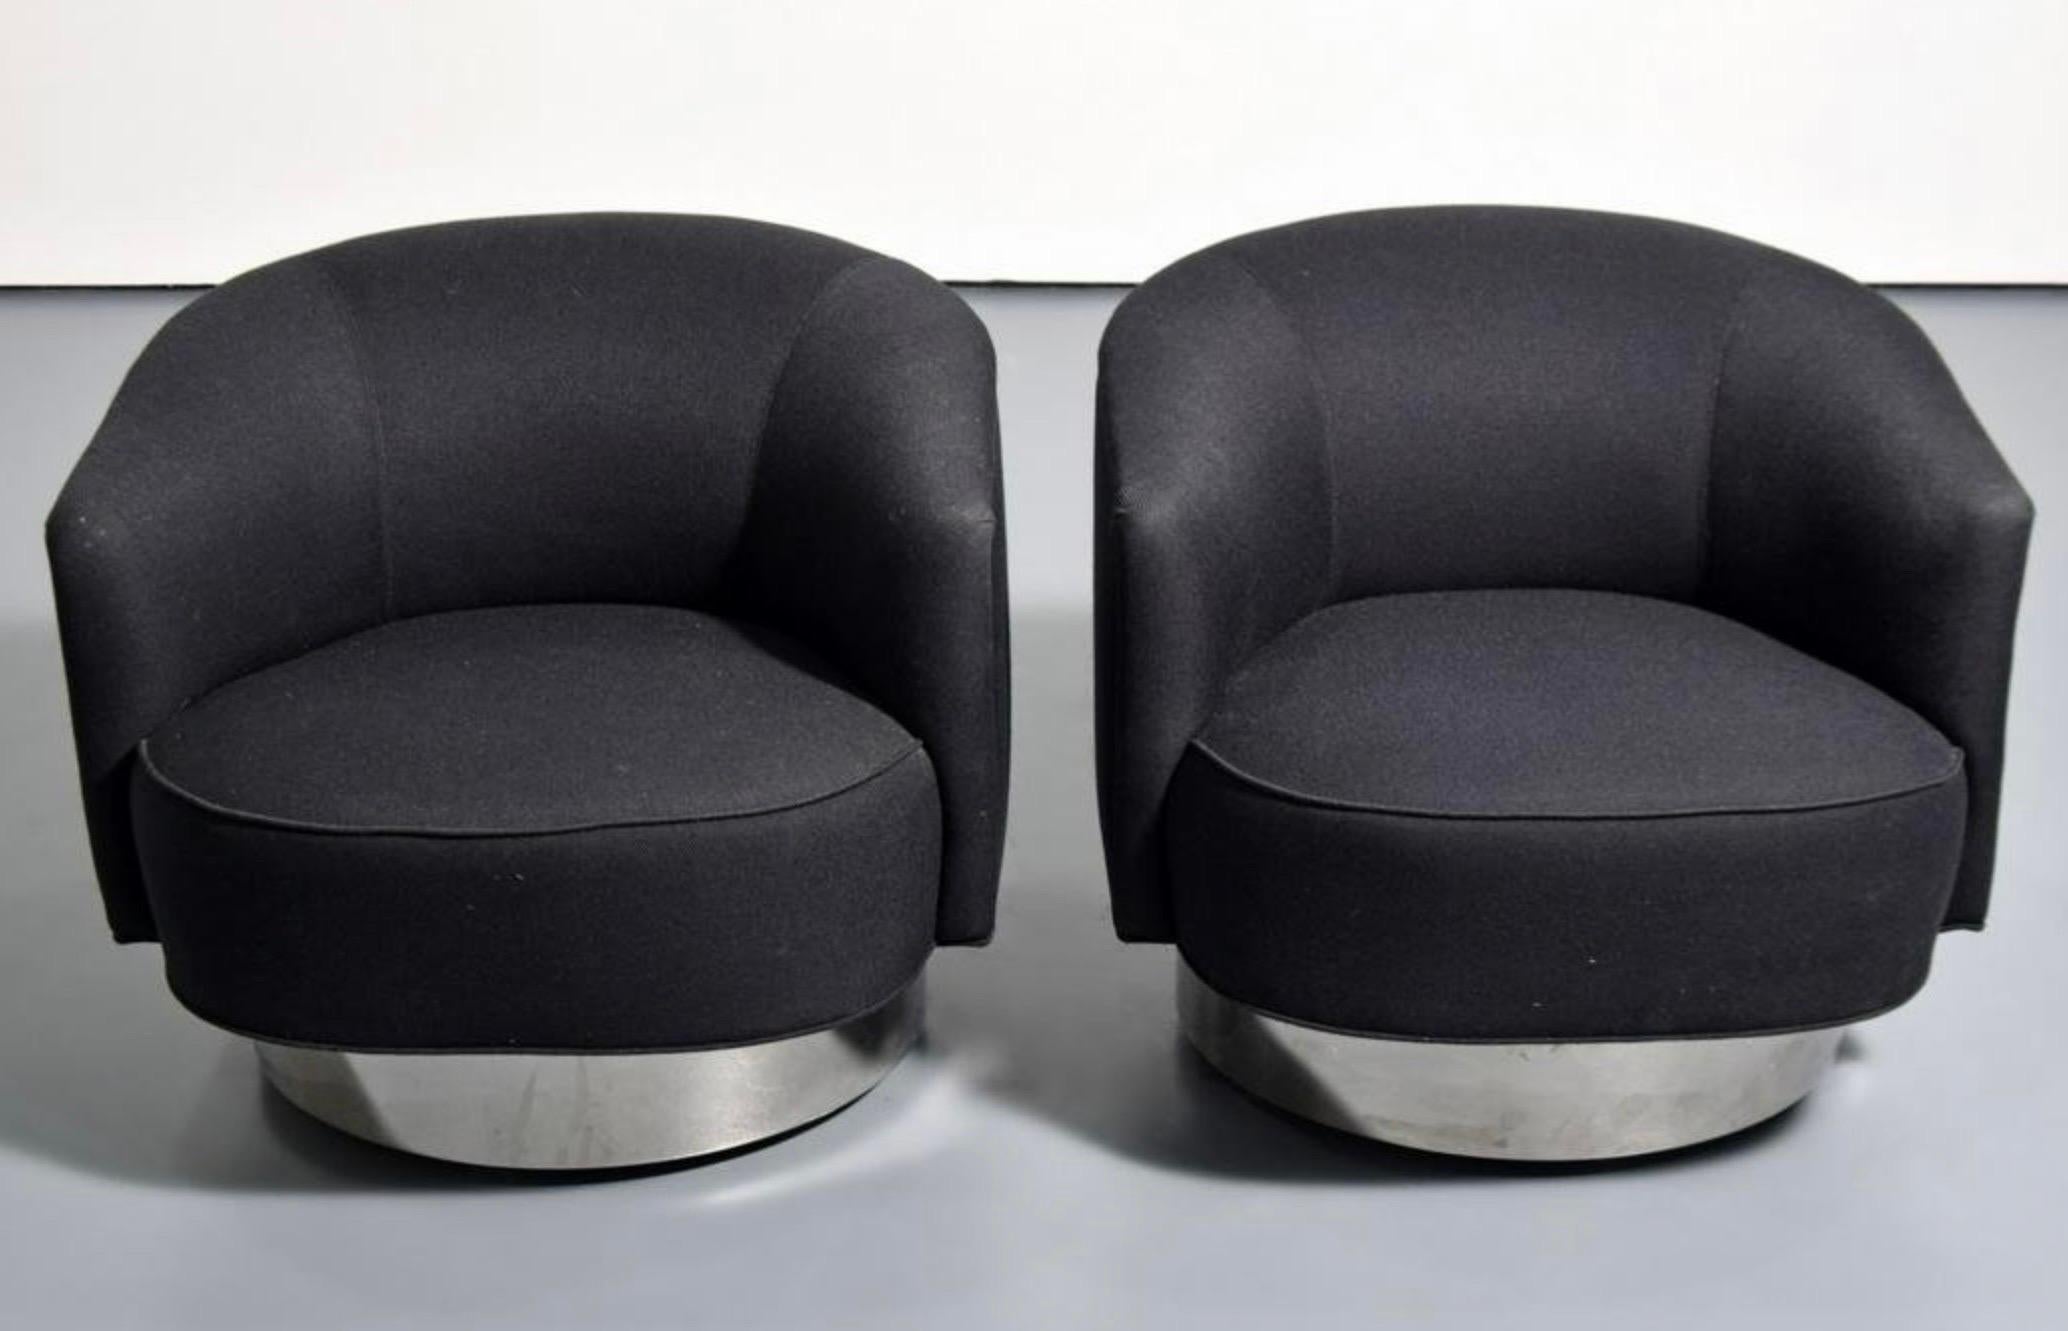 A lovely pair of vintage Vladimir Kagan swivel chairs on castors. These chairs feature chrome wrapped bases. One of the chairs retains it's original tag, which is partially obscured in the photo. The fabric is original and in good vintage condition,